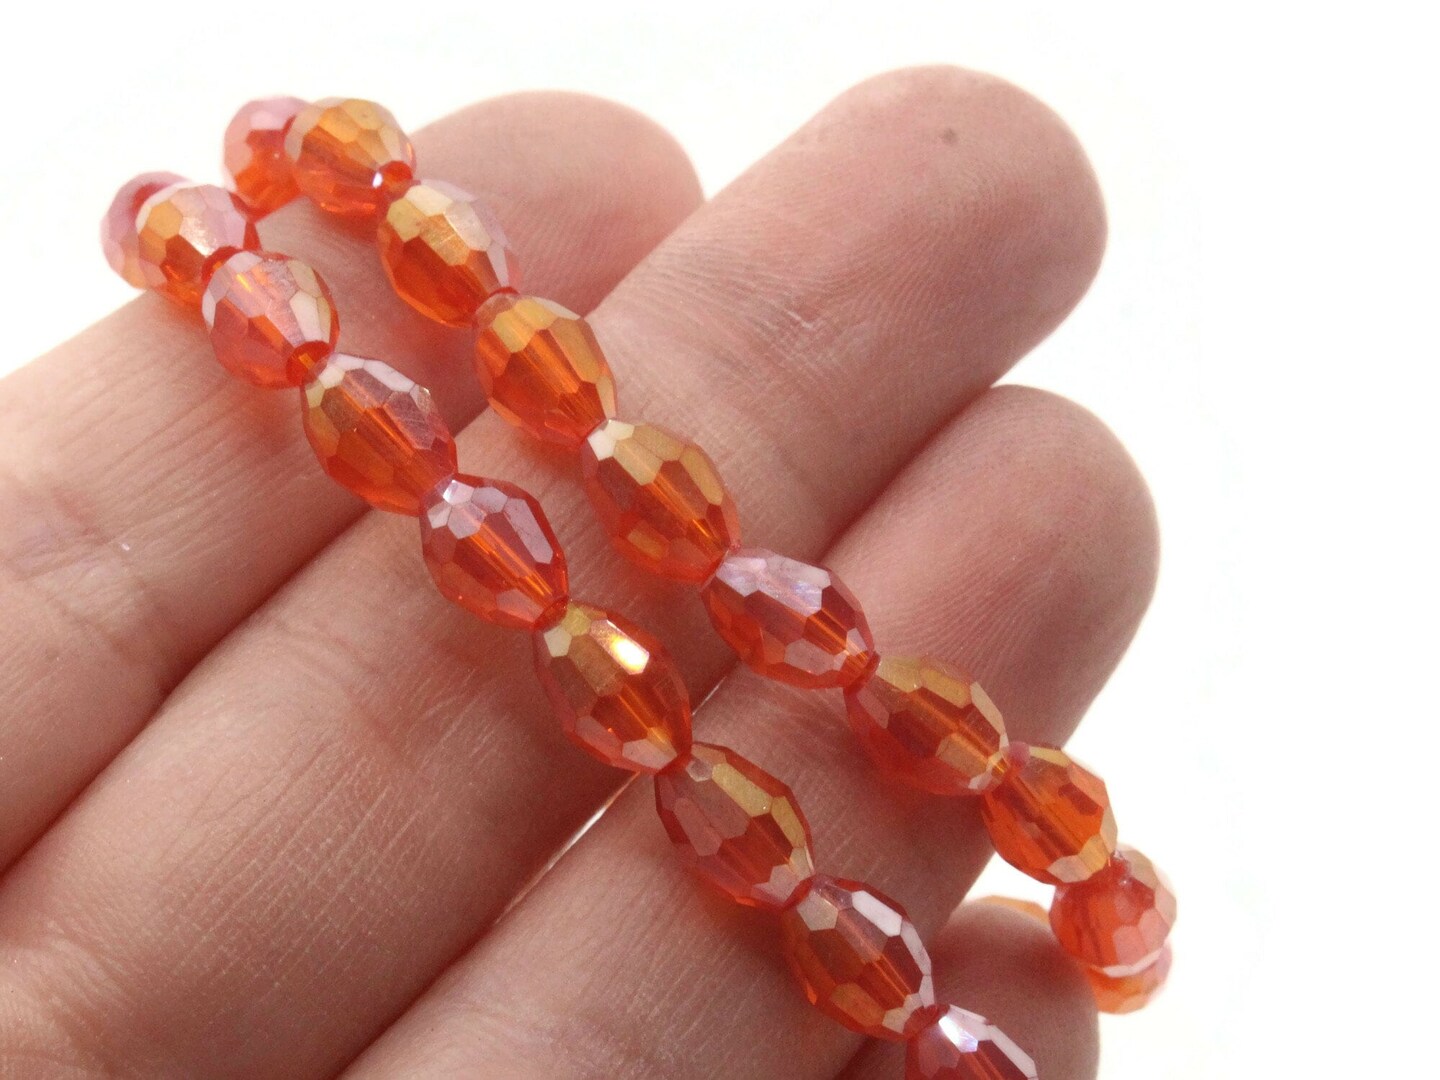 36 8mm Clear Red Glass Faceted Oval Beads